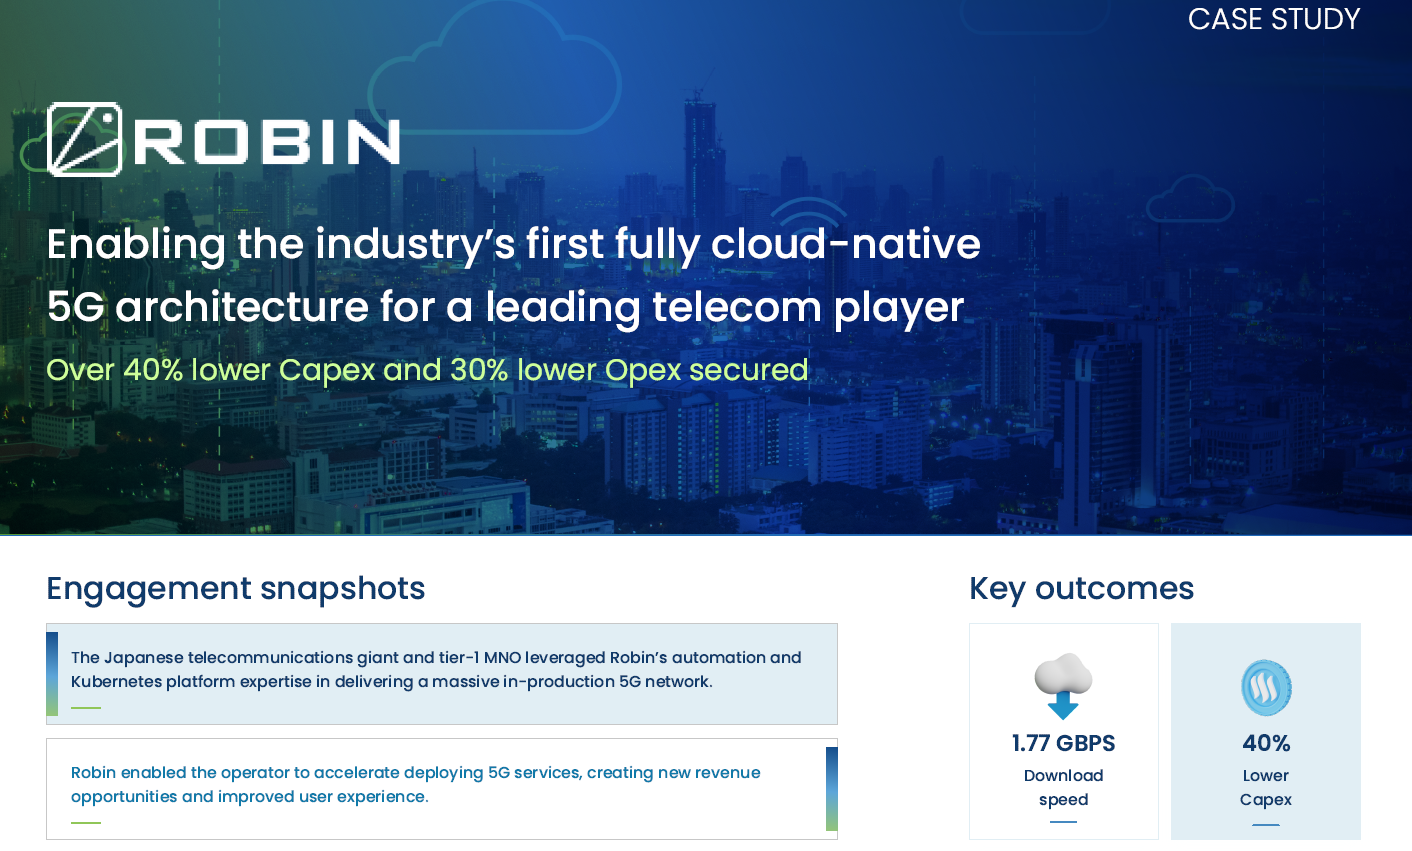 Enabling the industry’s first fully cloud-native 5G architecture for a leading telecom player